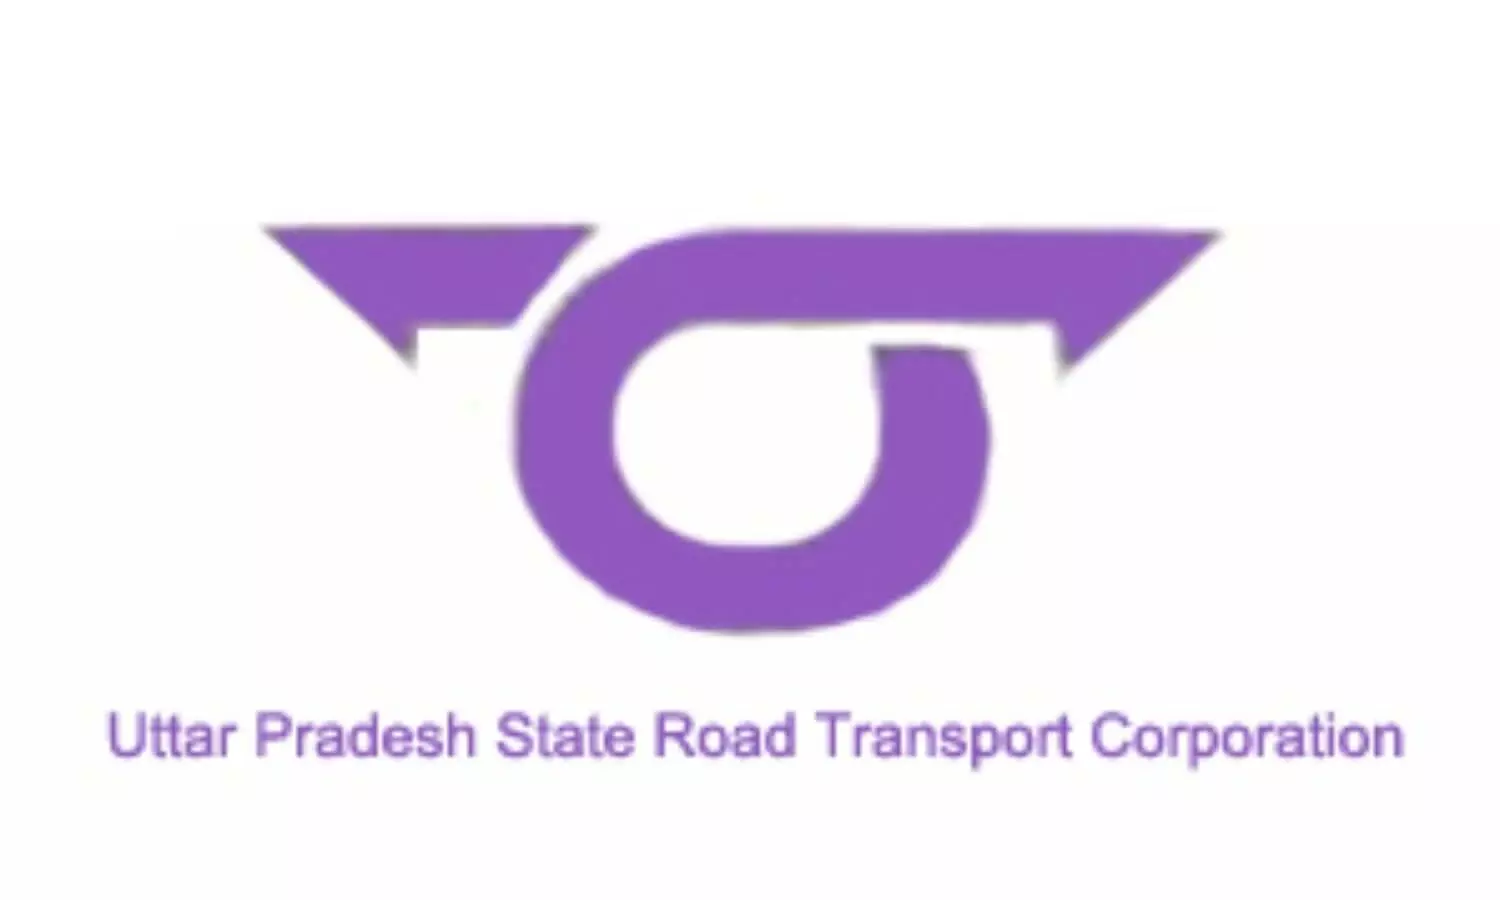 UP Transport Corporation Recruitment contract drivers by setting up camps